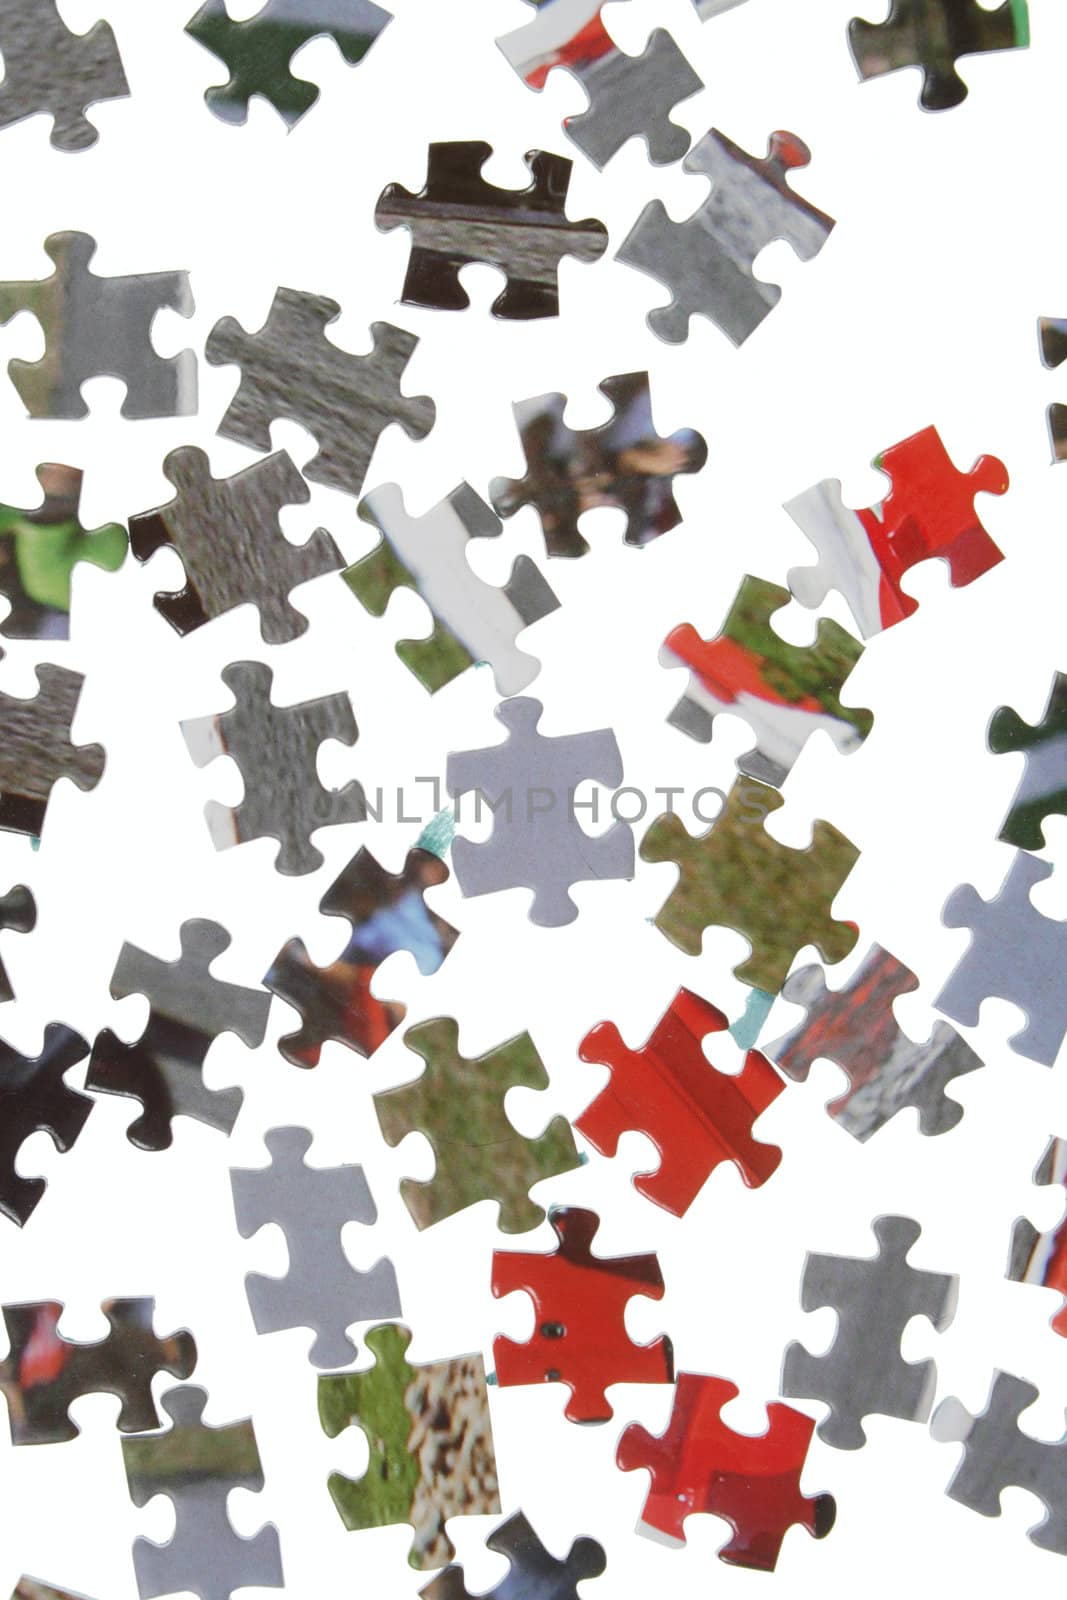 Pieces of puzzle, isolated on white background